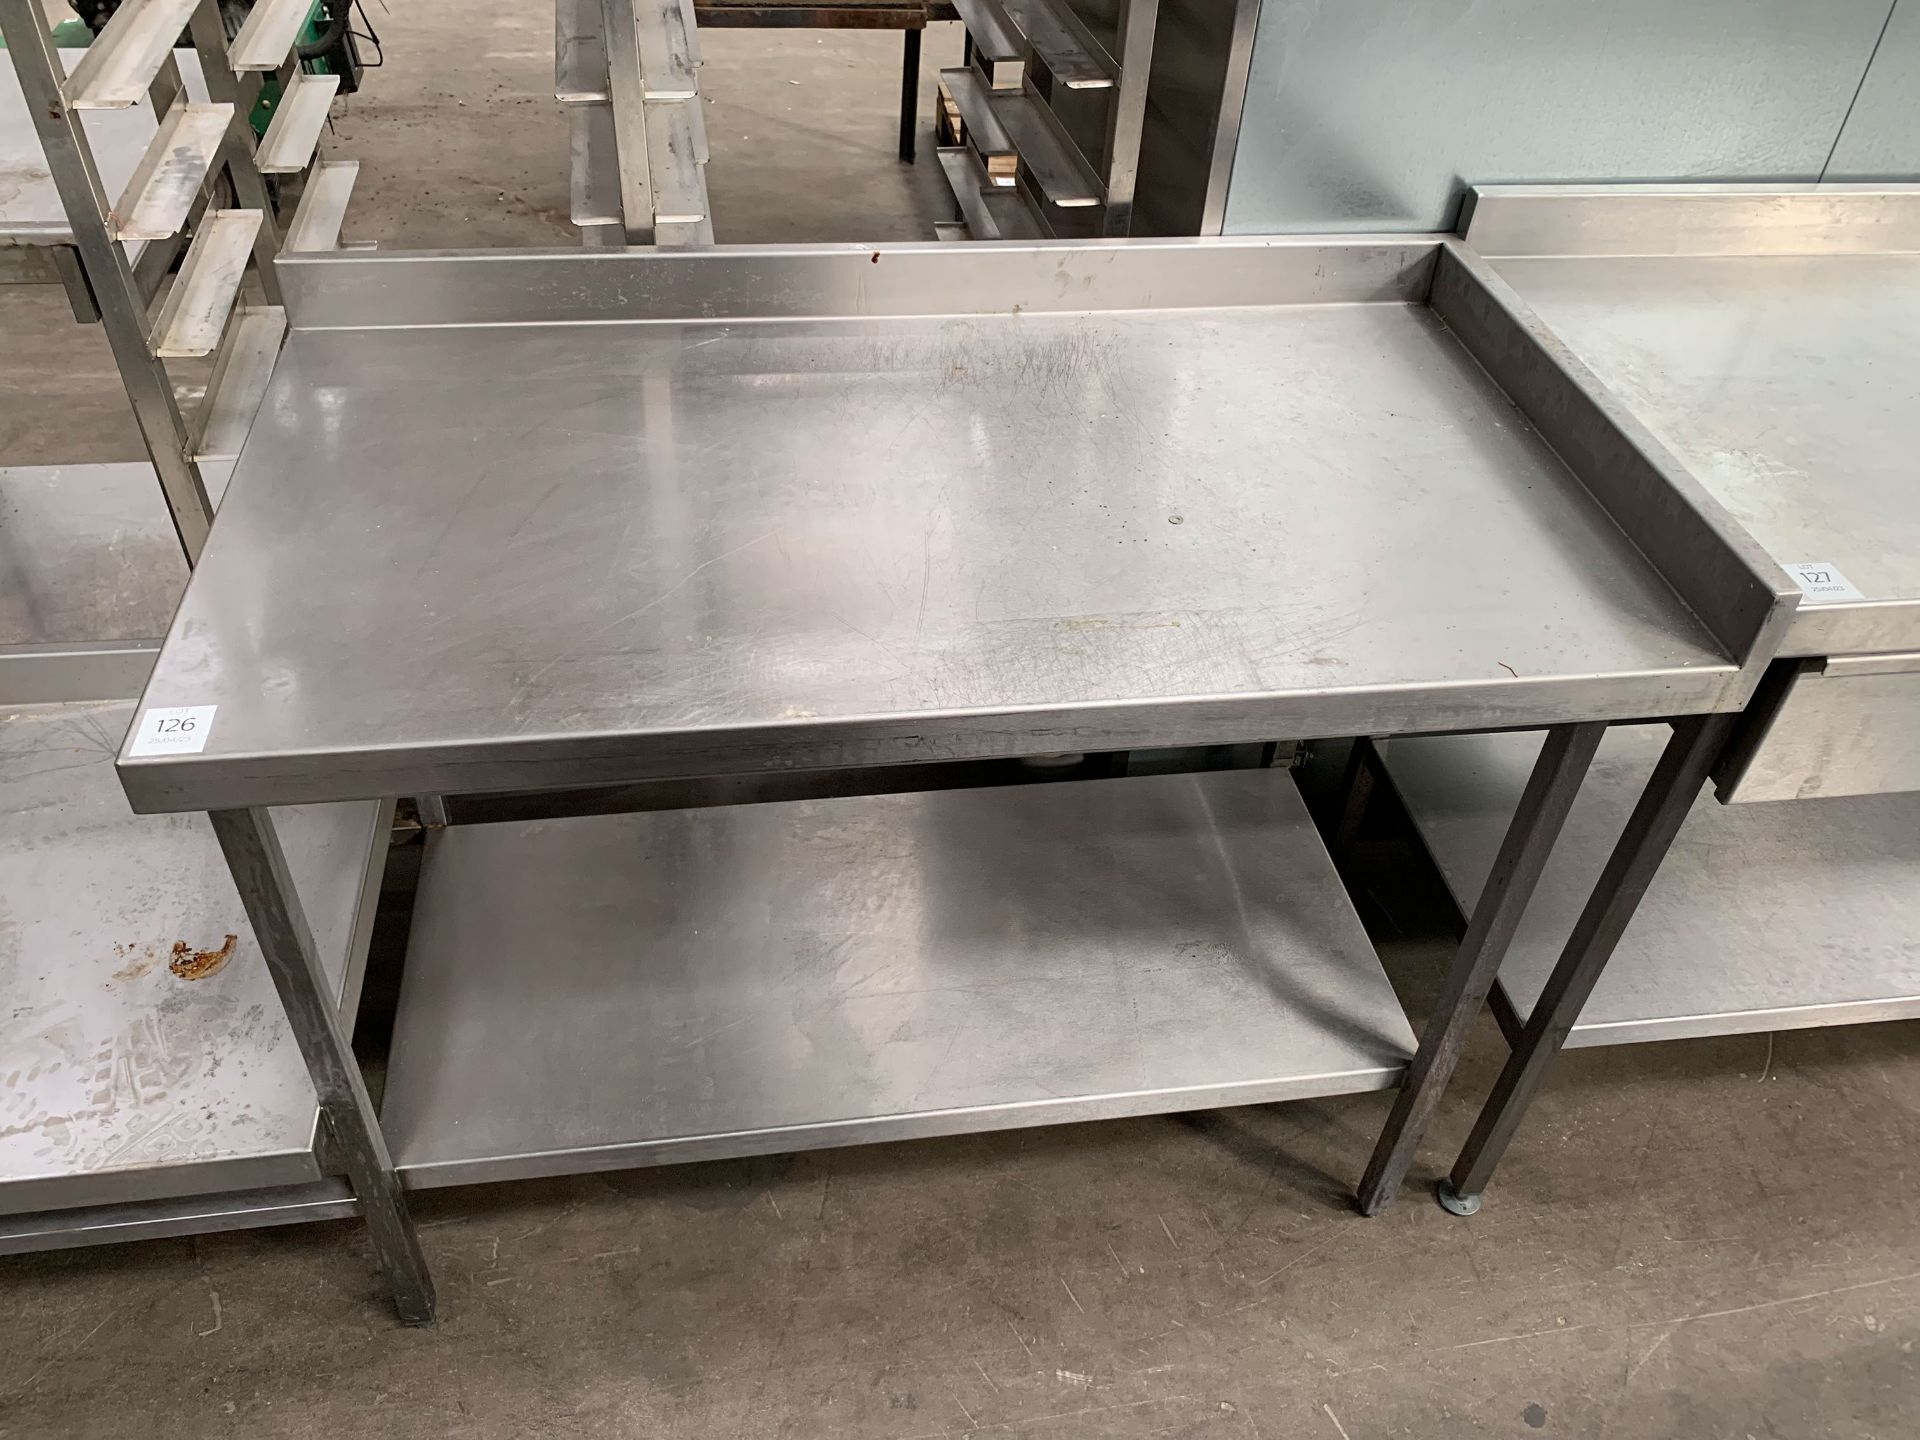 Bespoke 2-tier Stainless Steel Prep Table with Lower Side Table - all one unit with Splashback - Image 2 of 4